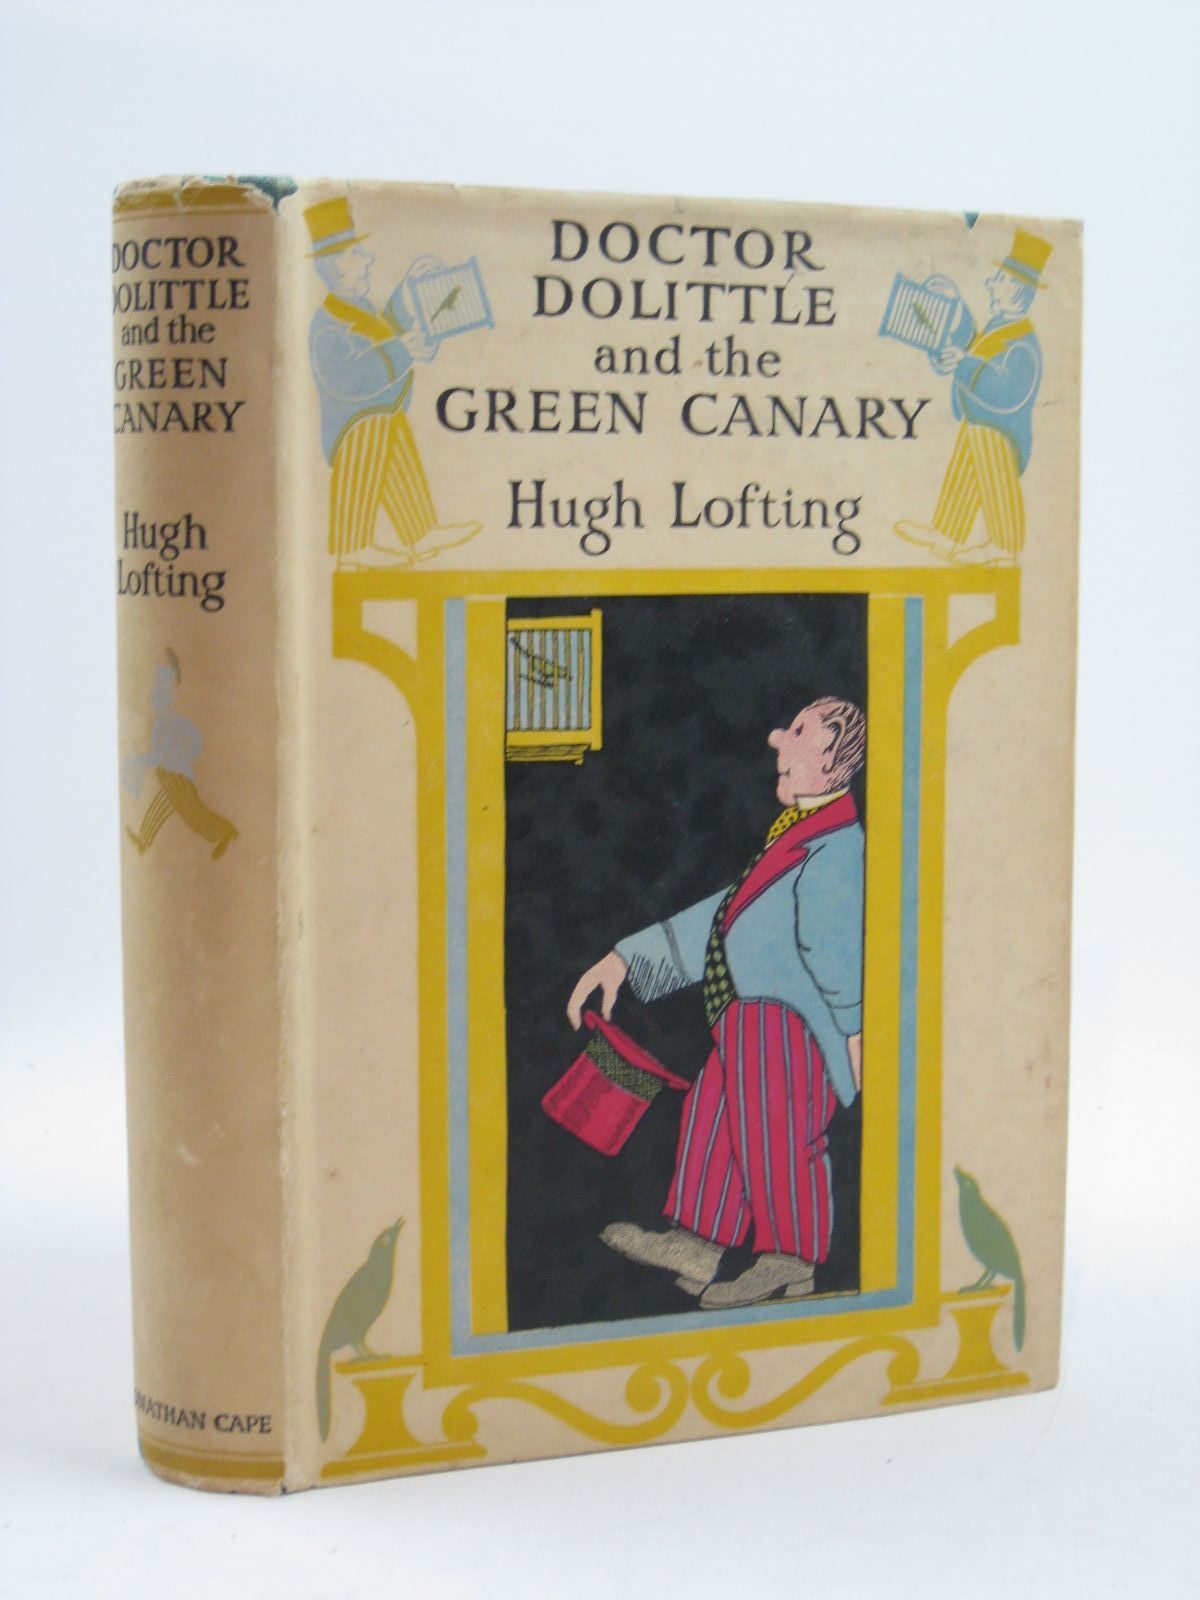 Cover of DOCTOR DOLITTLE AND THE GREEN CANARY by Hugh Lofting